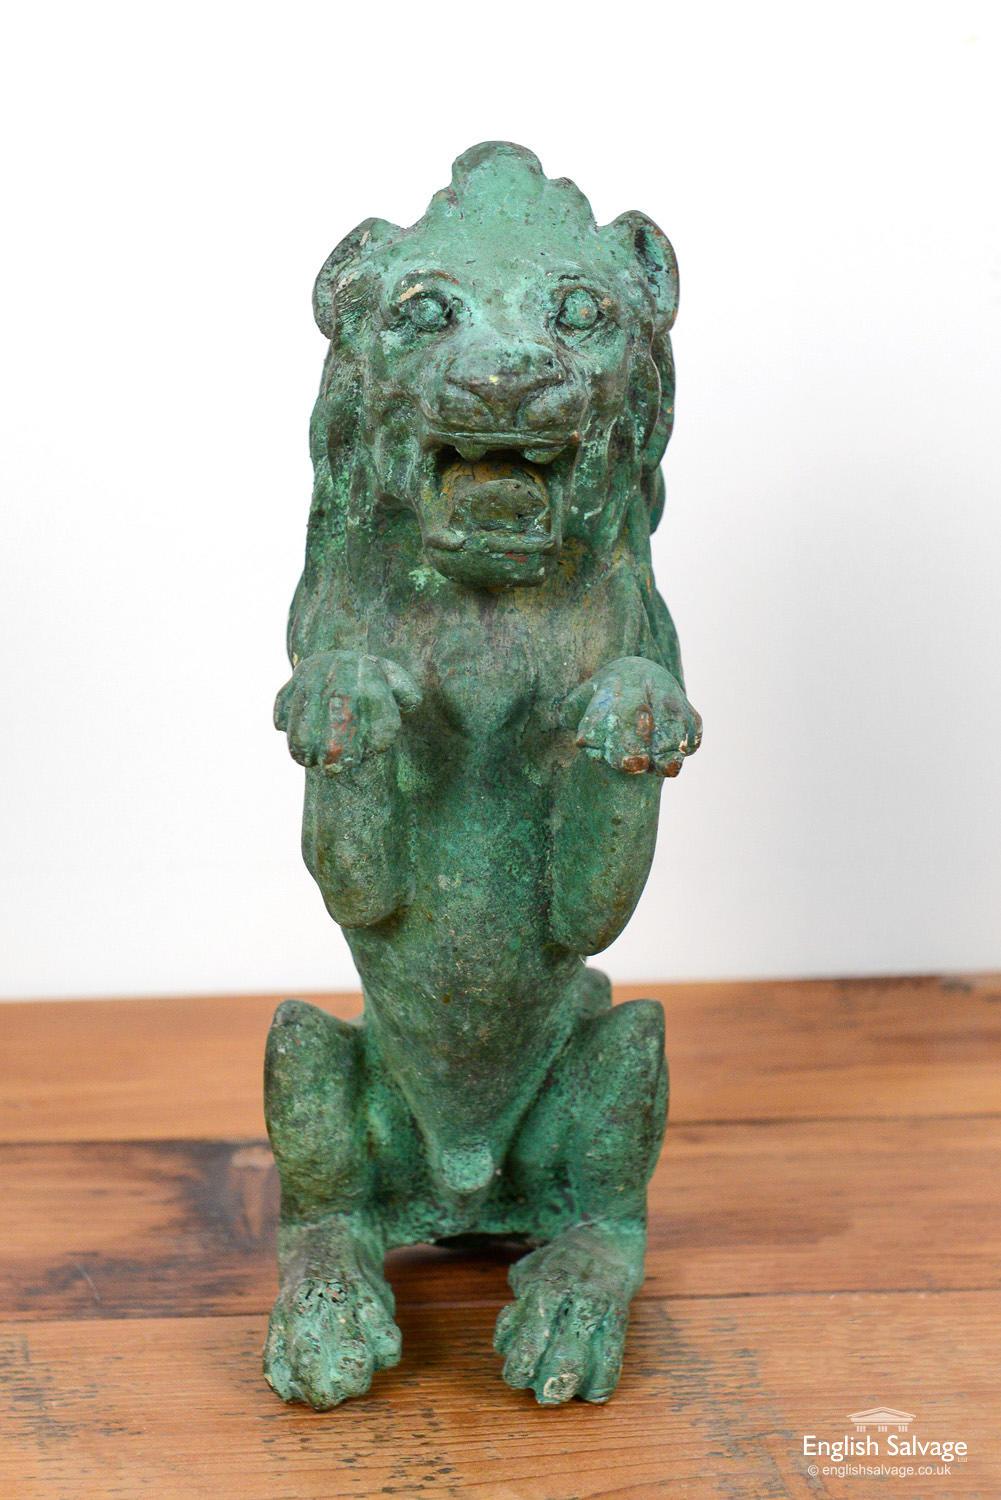 Cast bronze sculpture of a lion on his haunches, in the heraldic rampant position, with an oxidized finish. One rear leg is slightly bent, otherwise good condition.